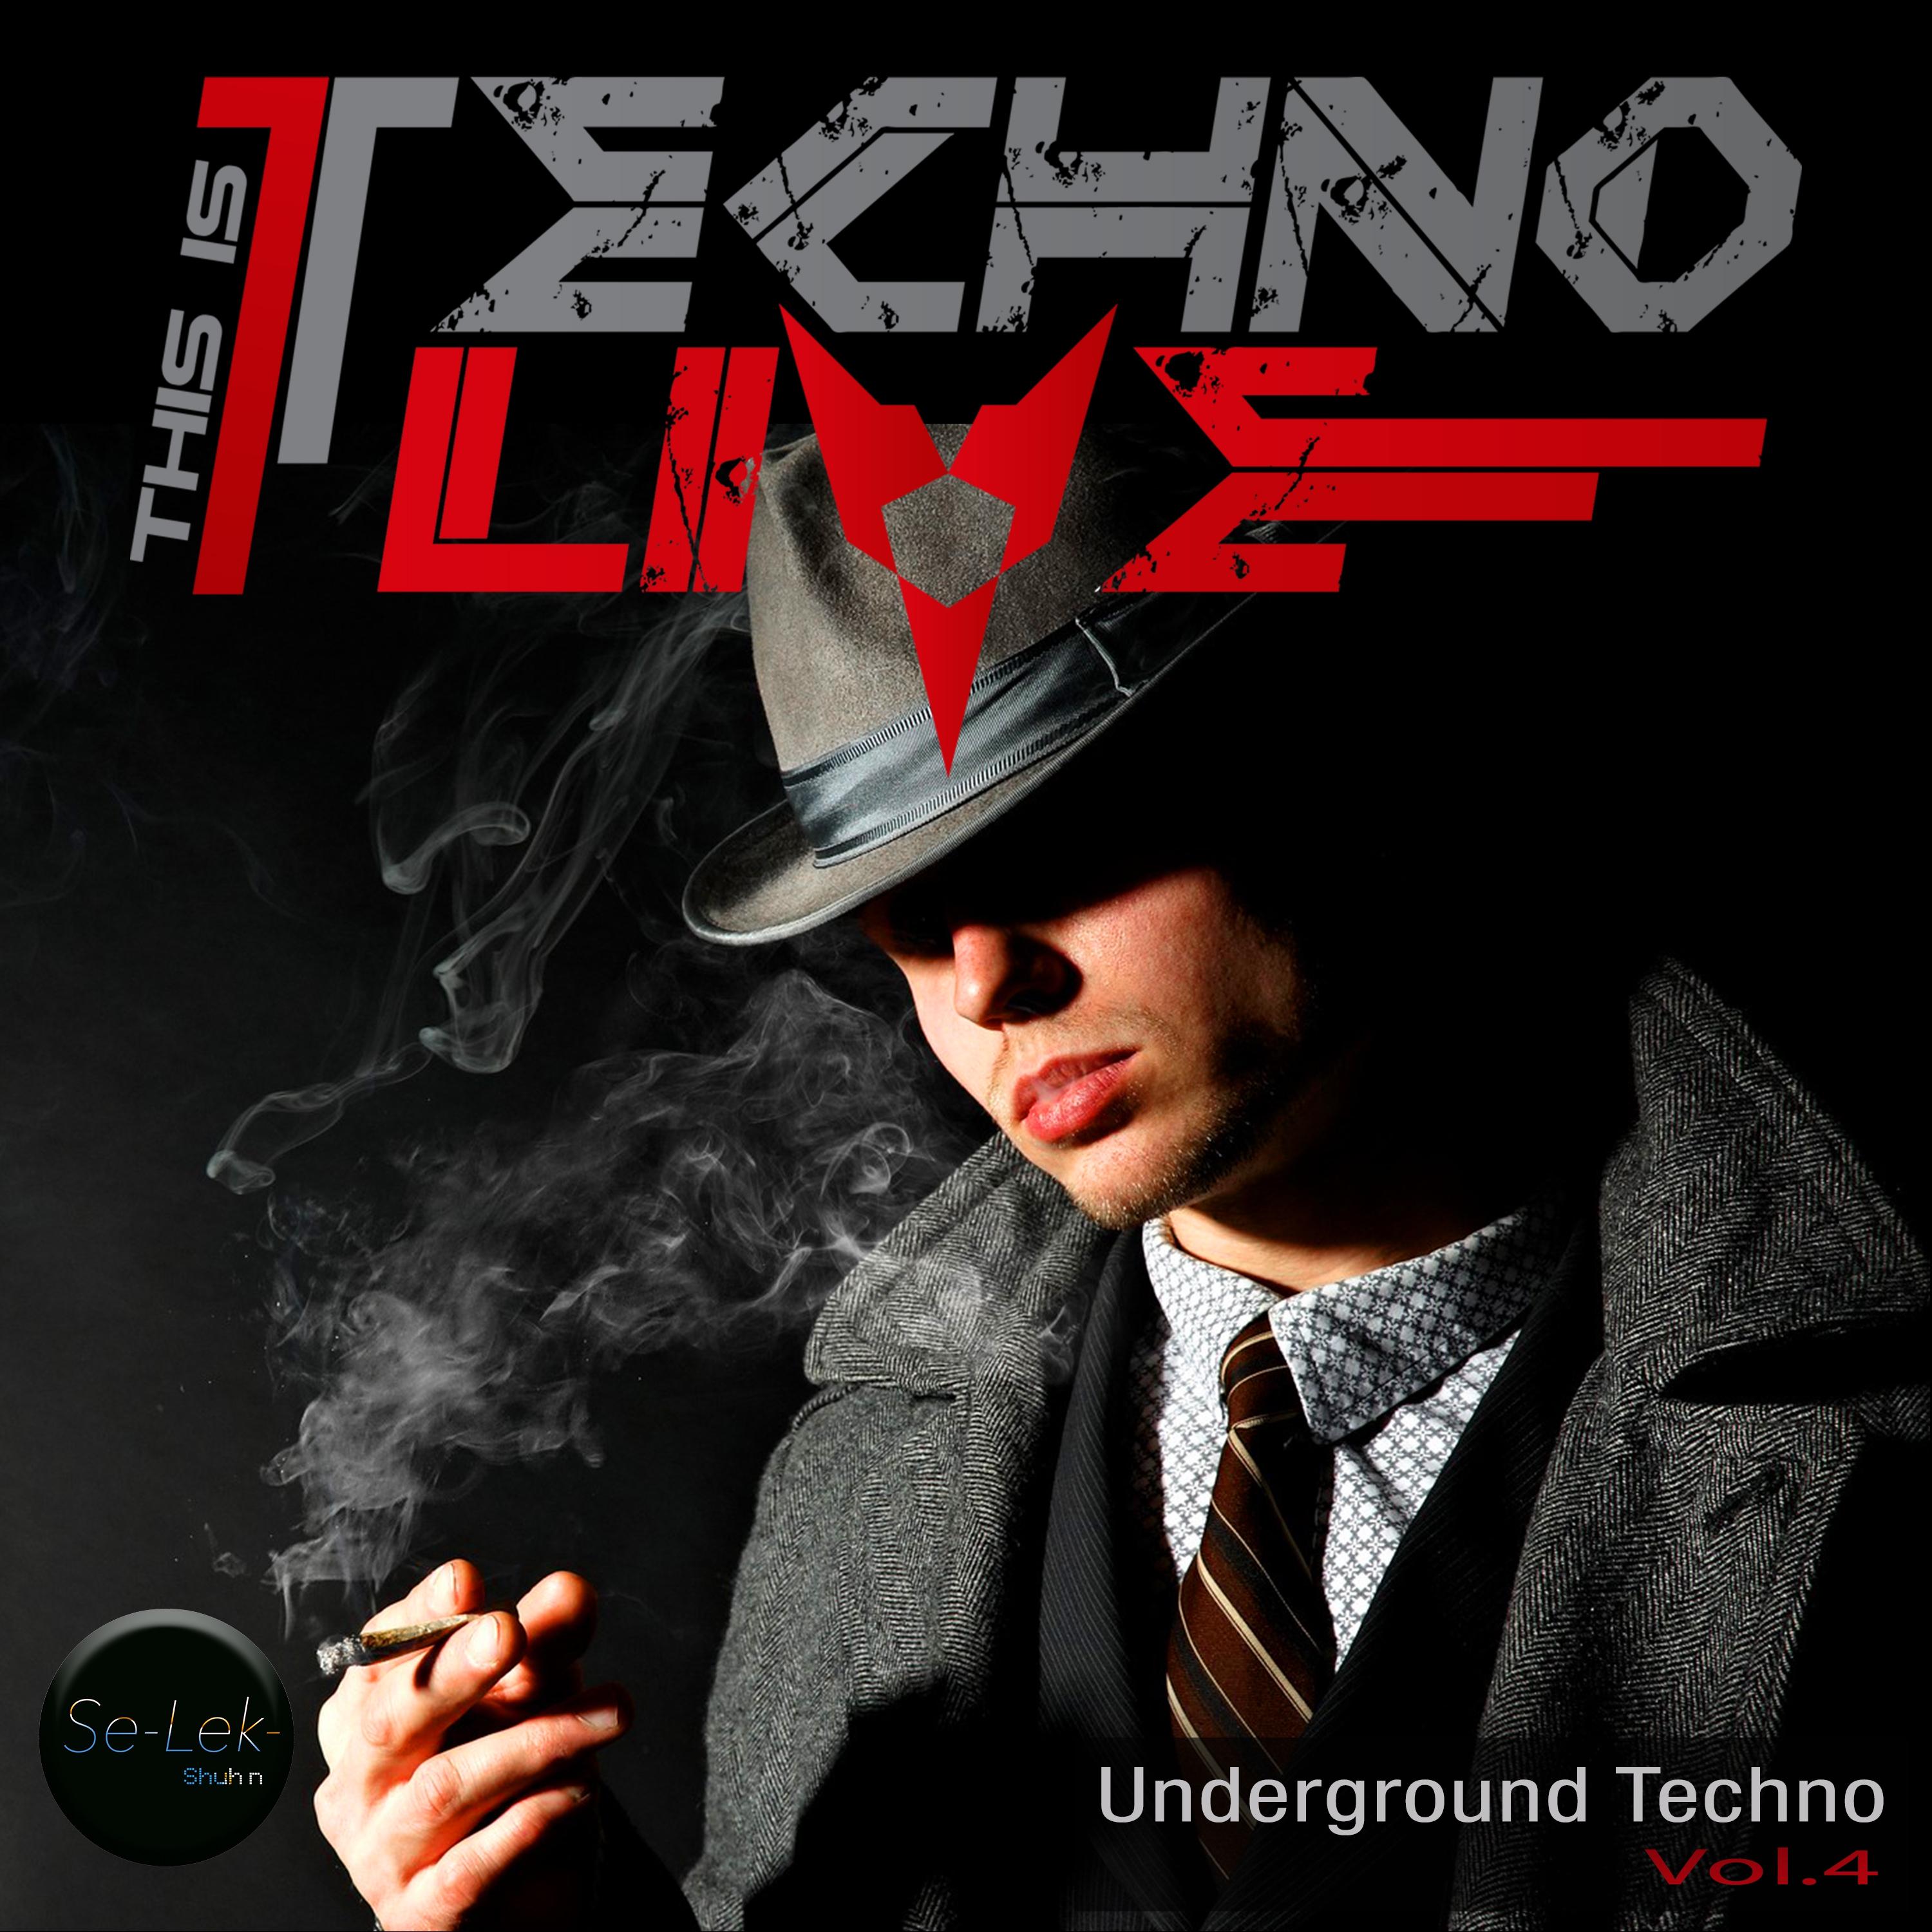 This Is Techno Live, Vol. 4